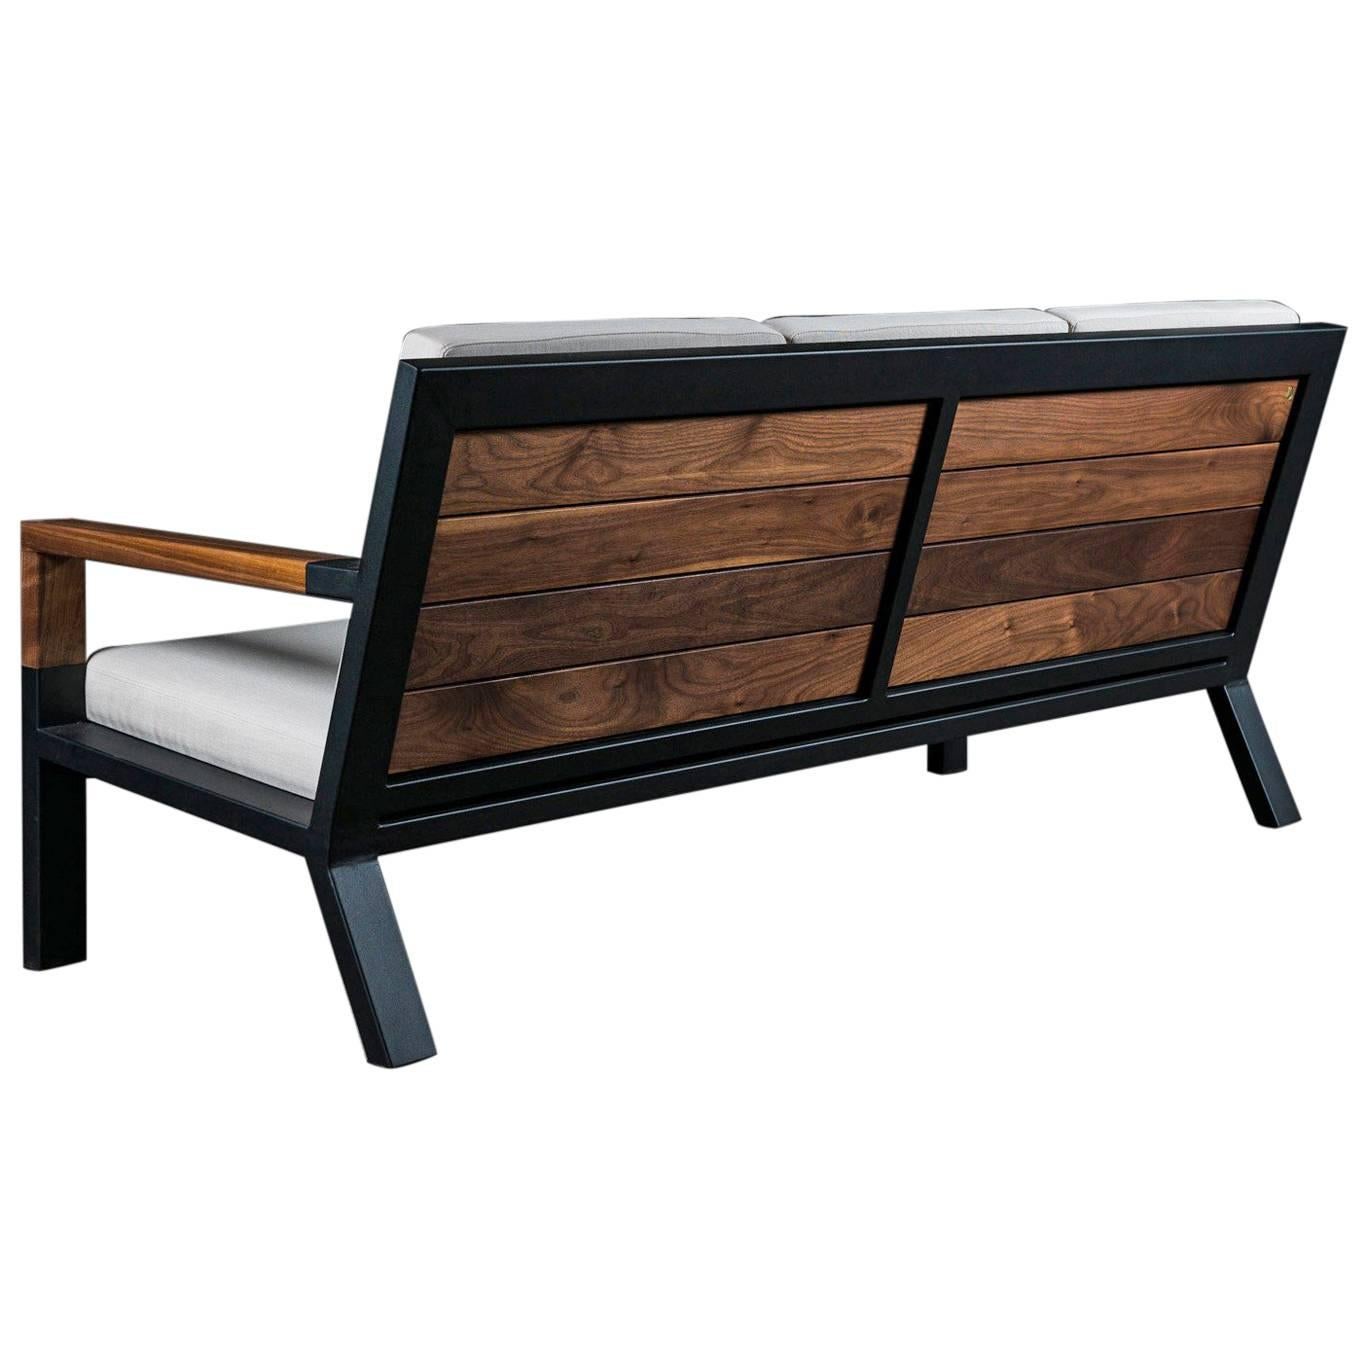 Baltimore Modern Sofa by Ambrozia, Walnut, Black Steel and Beige Upholstery